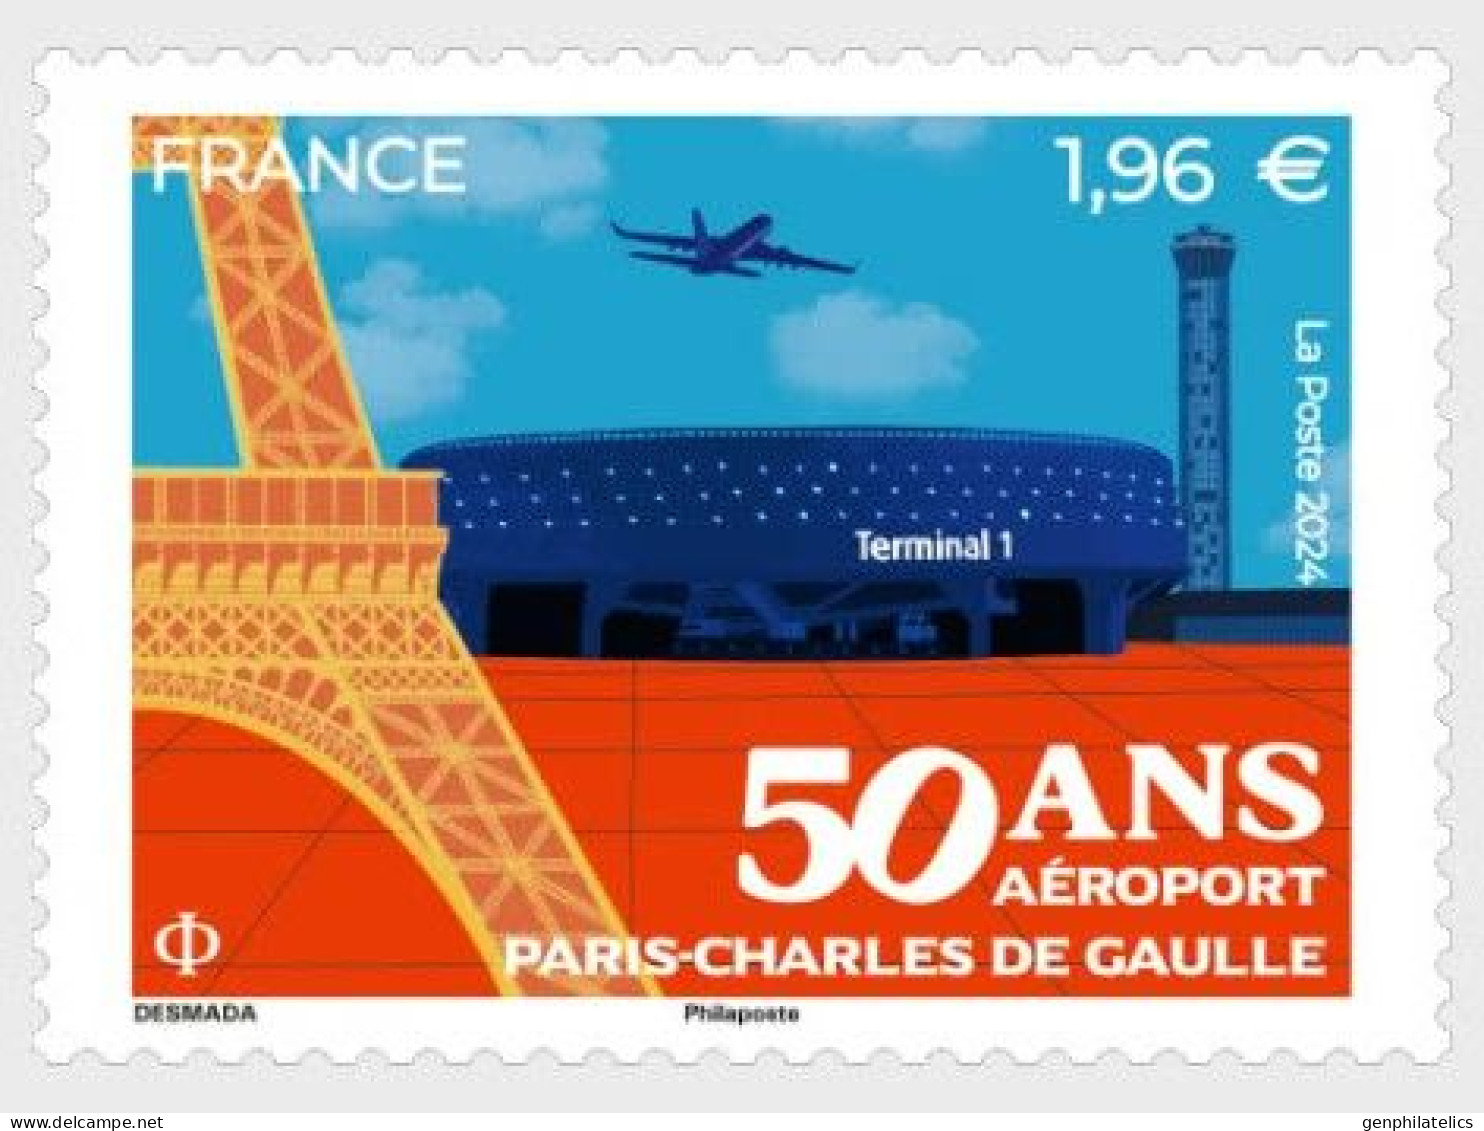 FRANCE 2024 EVENTS 50th Anniv. Of The Charles De Gaulle Airport - Fine Stamp MNH - Neufs